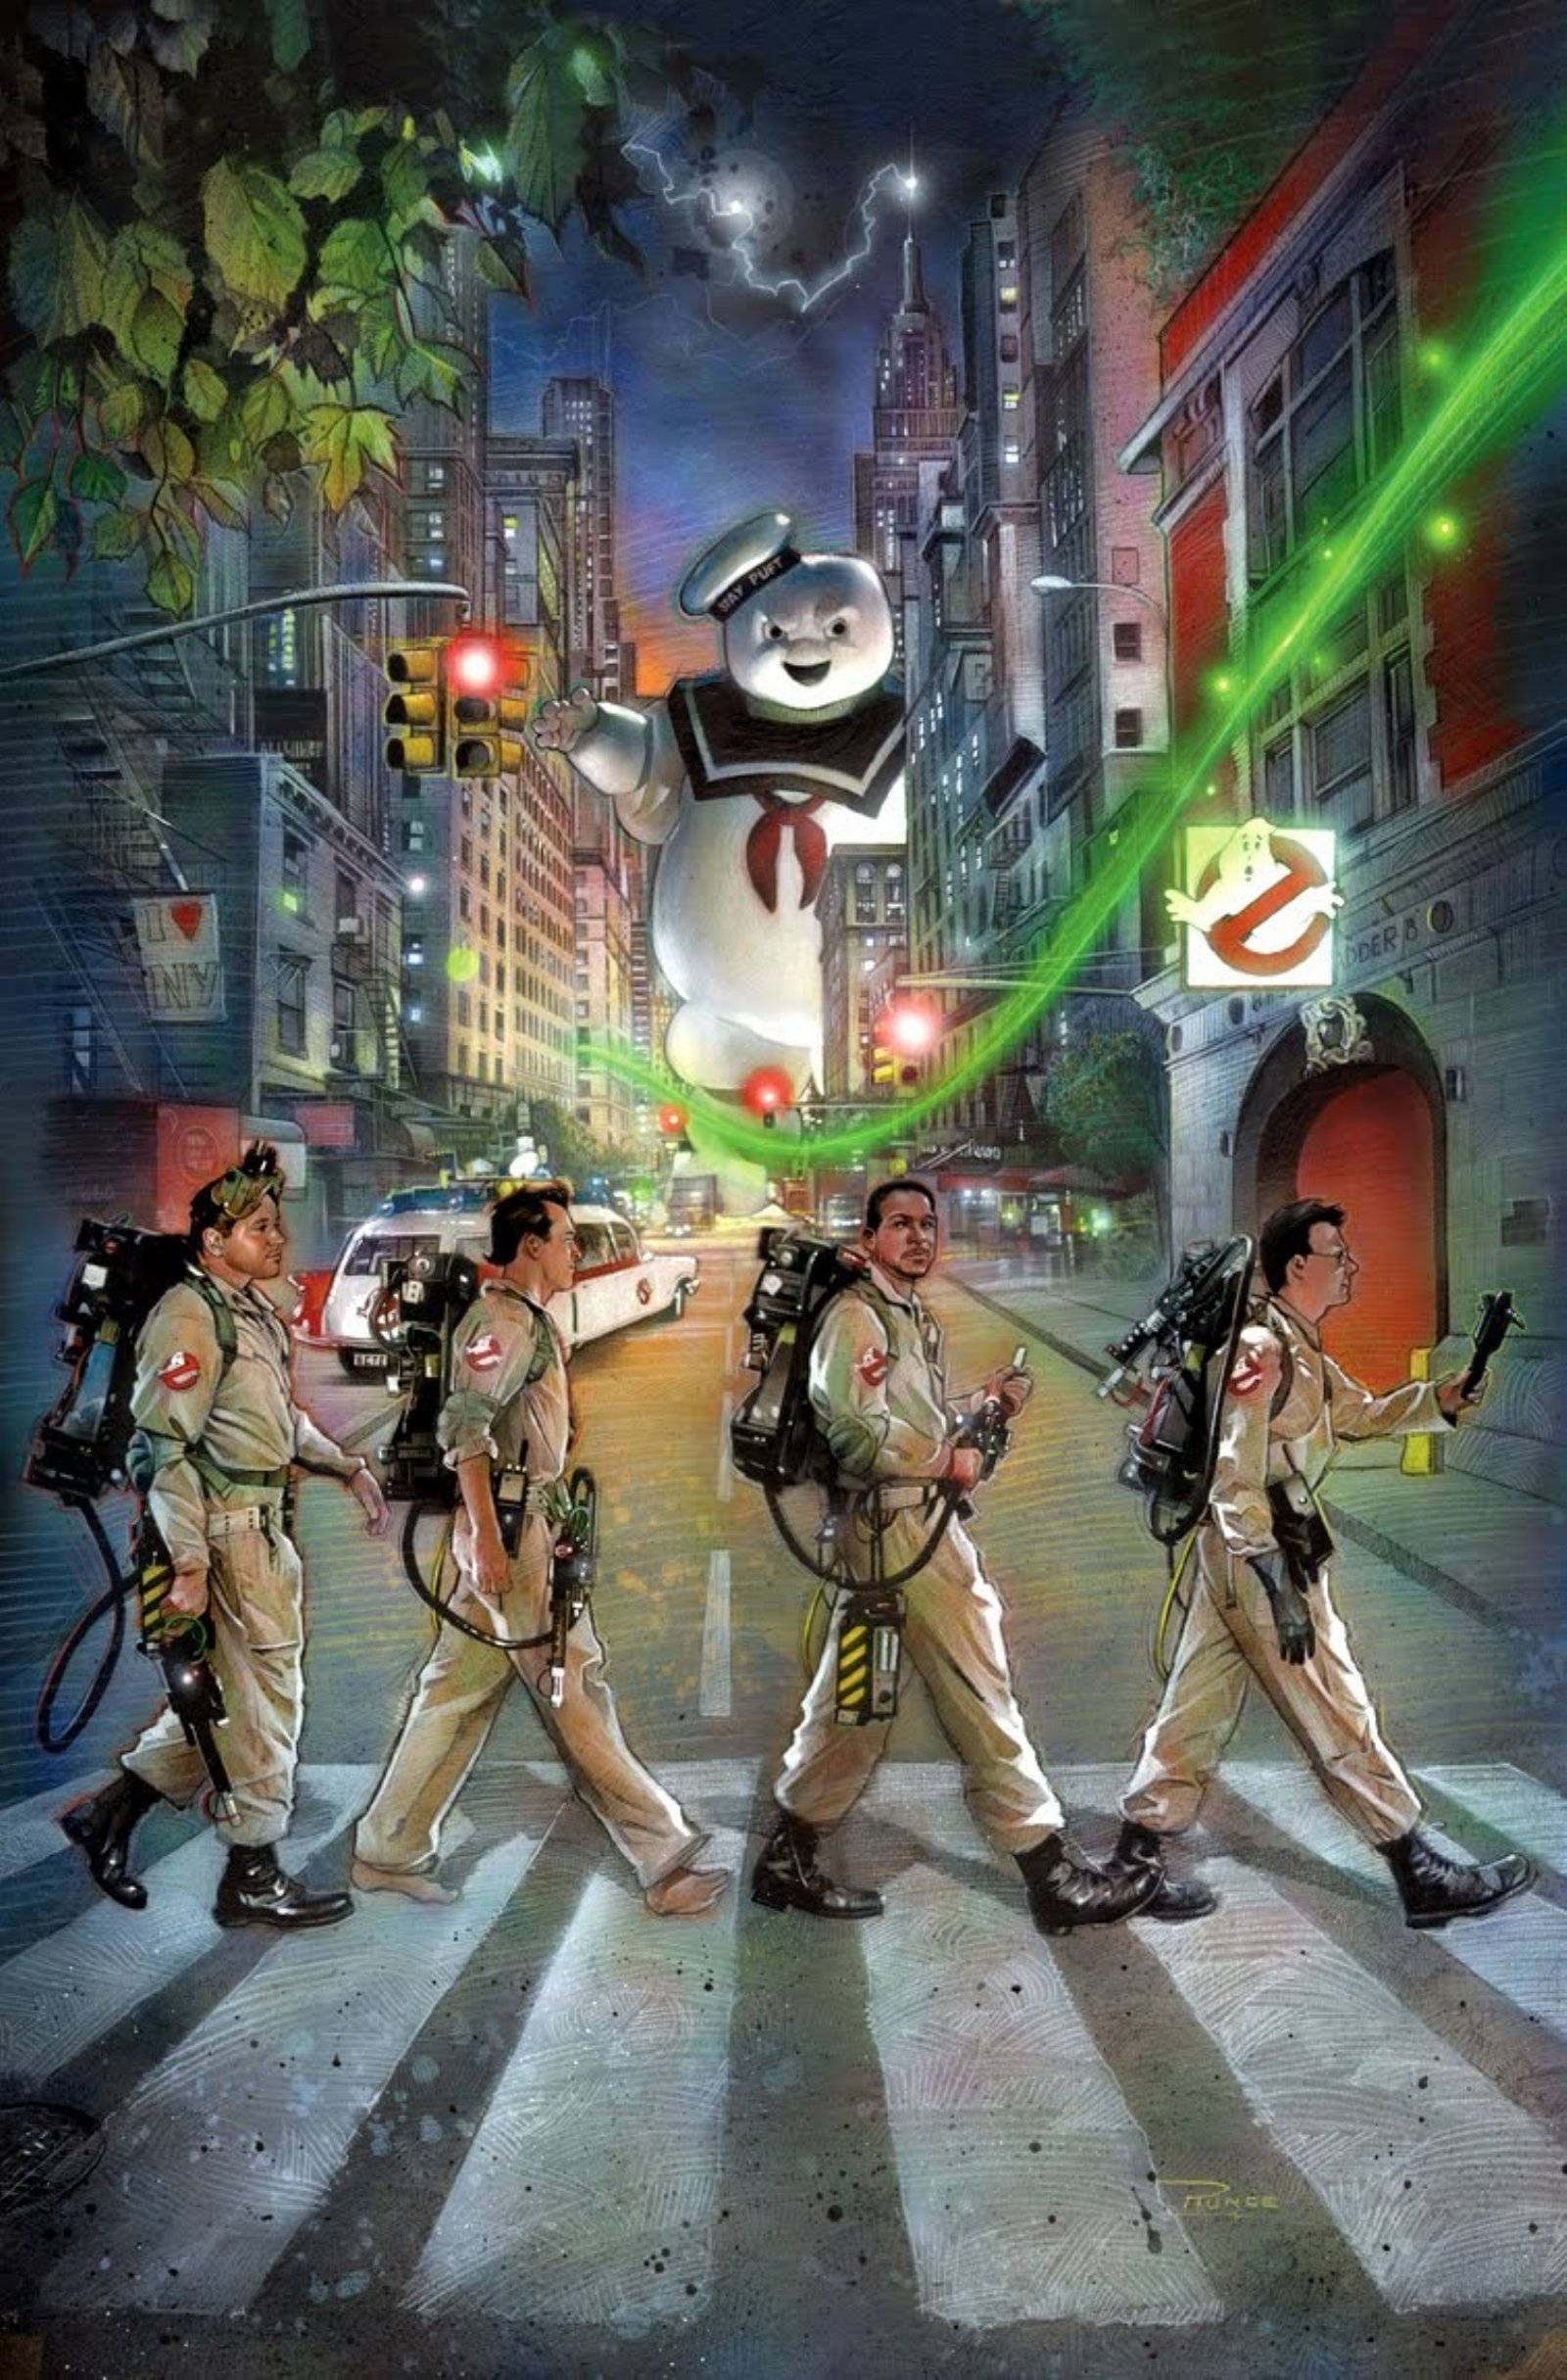 Ghostbusters: A film following three eccentric parapsychologists who start a ghost-catching business in New York City. 1600x2430 HD Wallpaper.